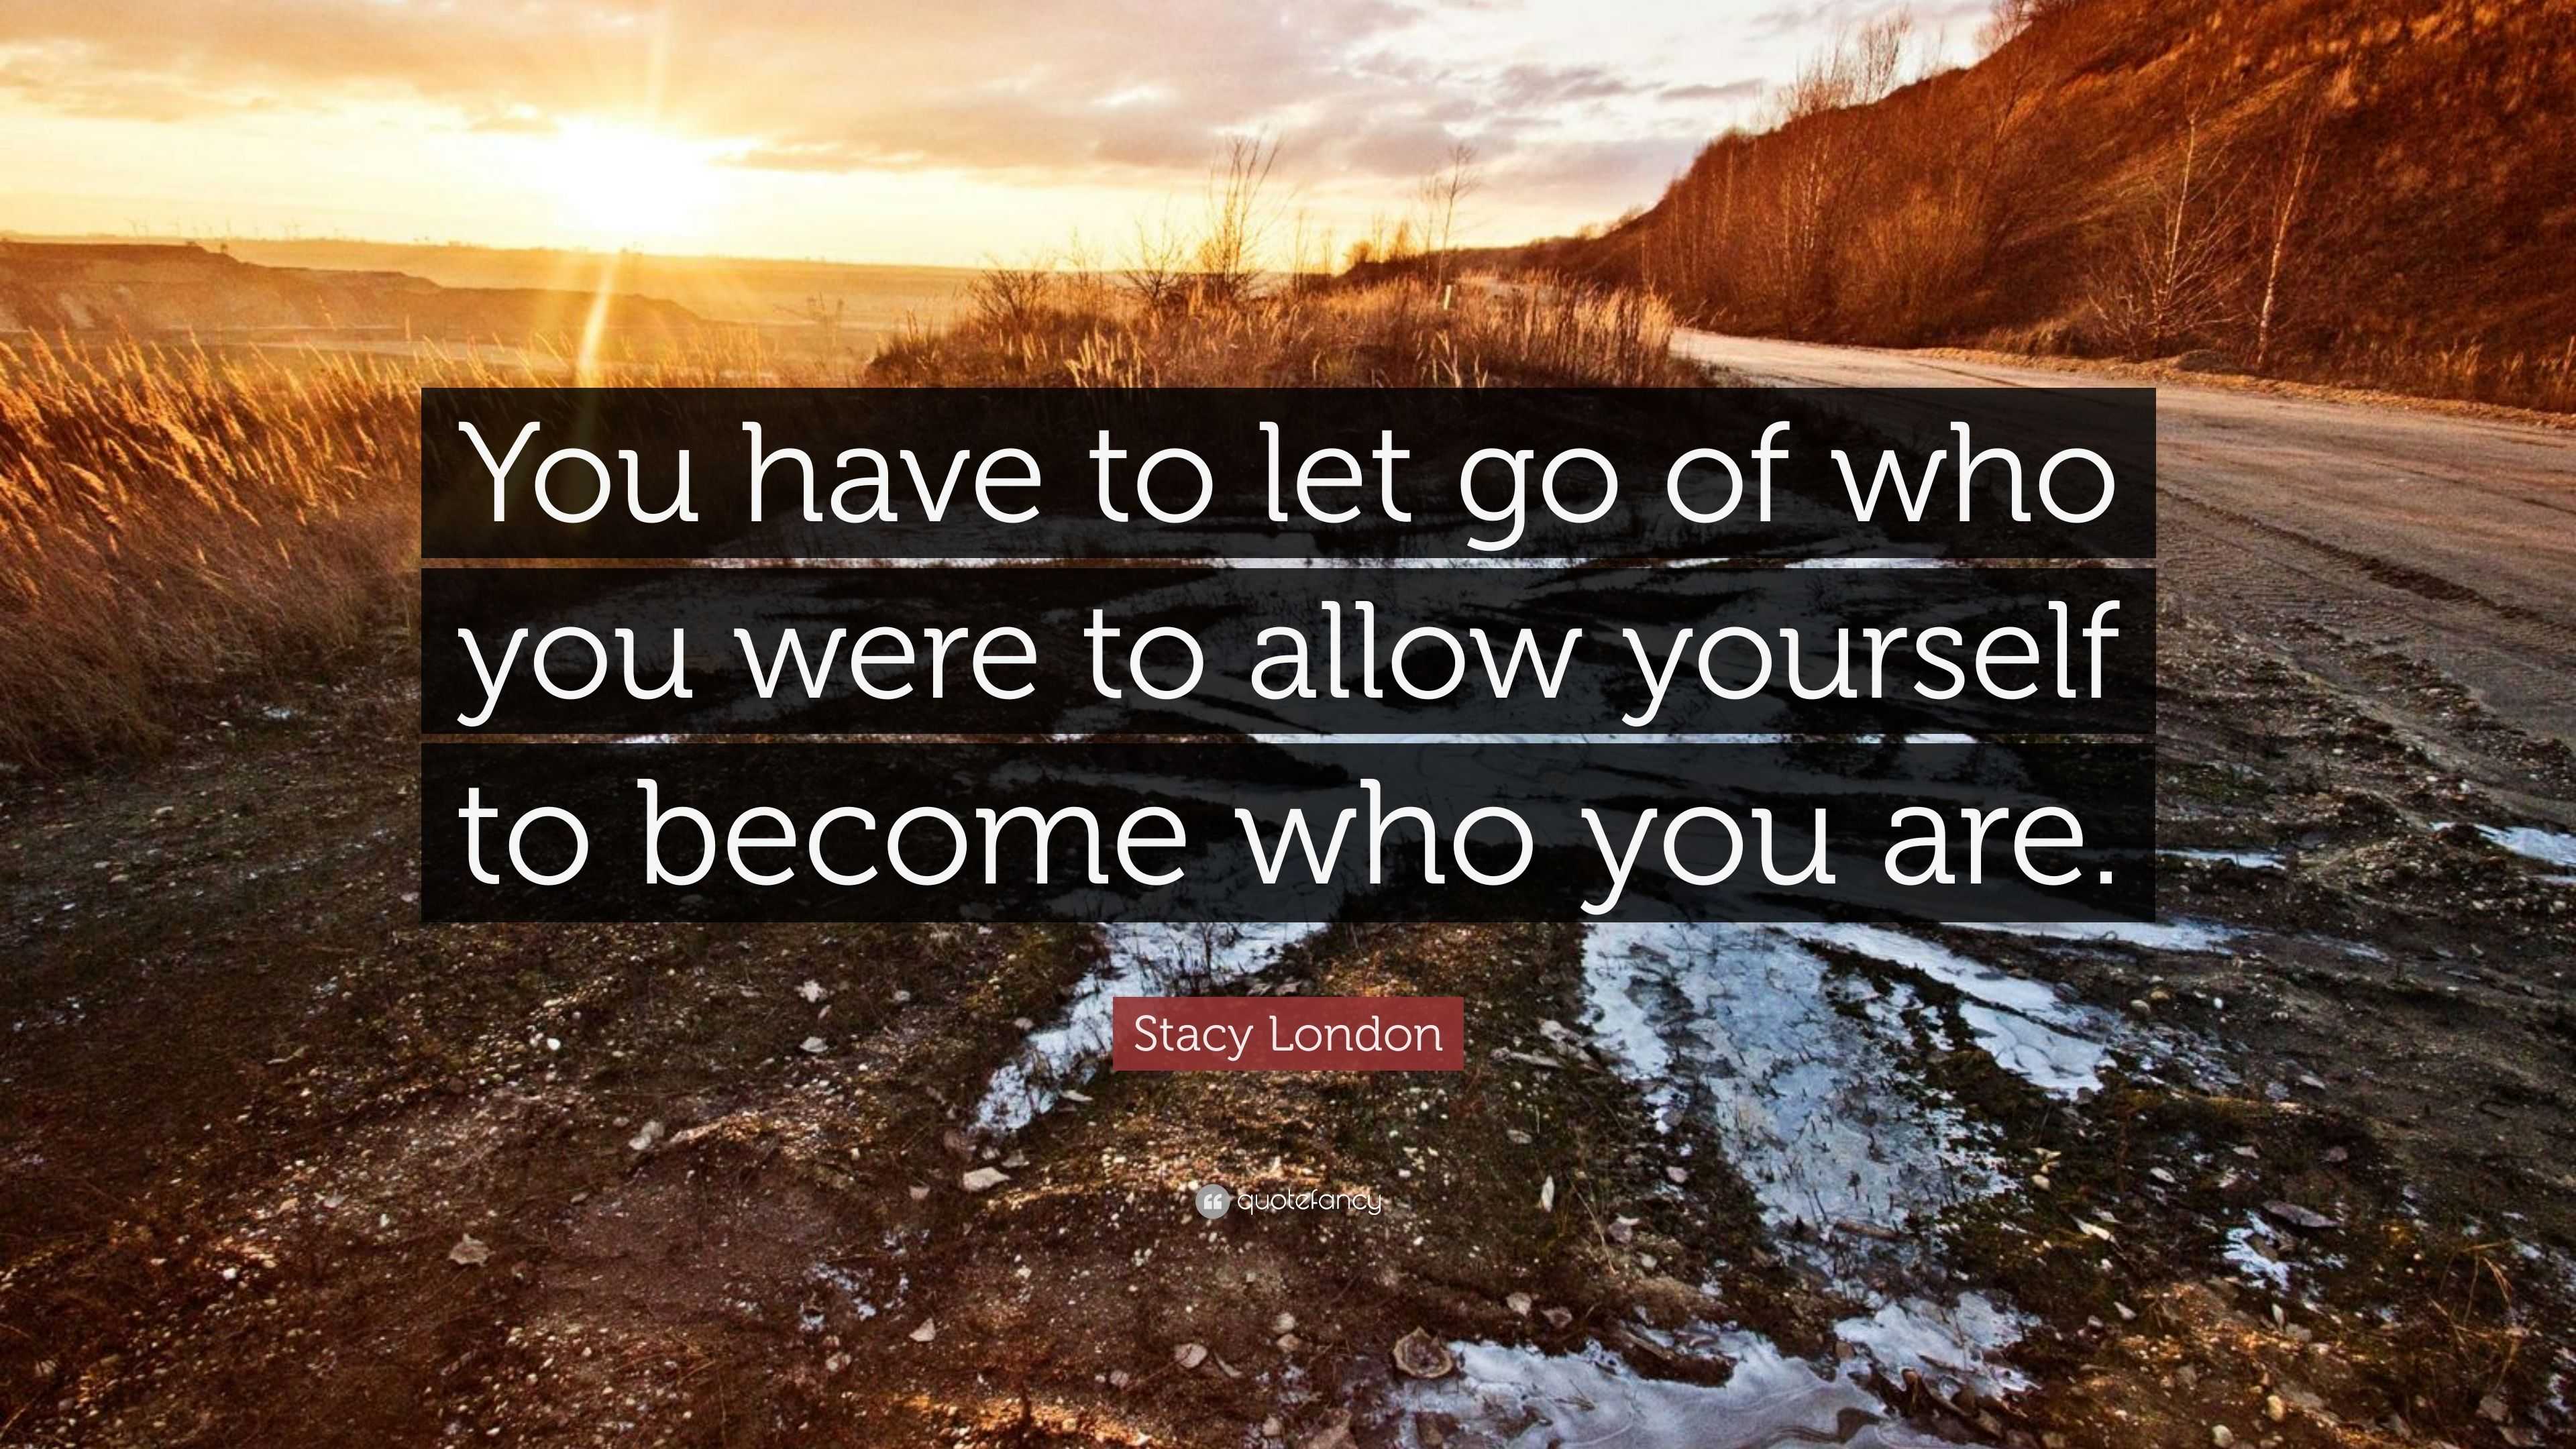 Stacy London Quote: “You have to let go of who you were to allow ...